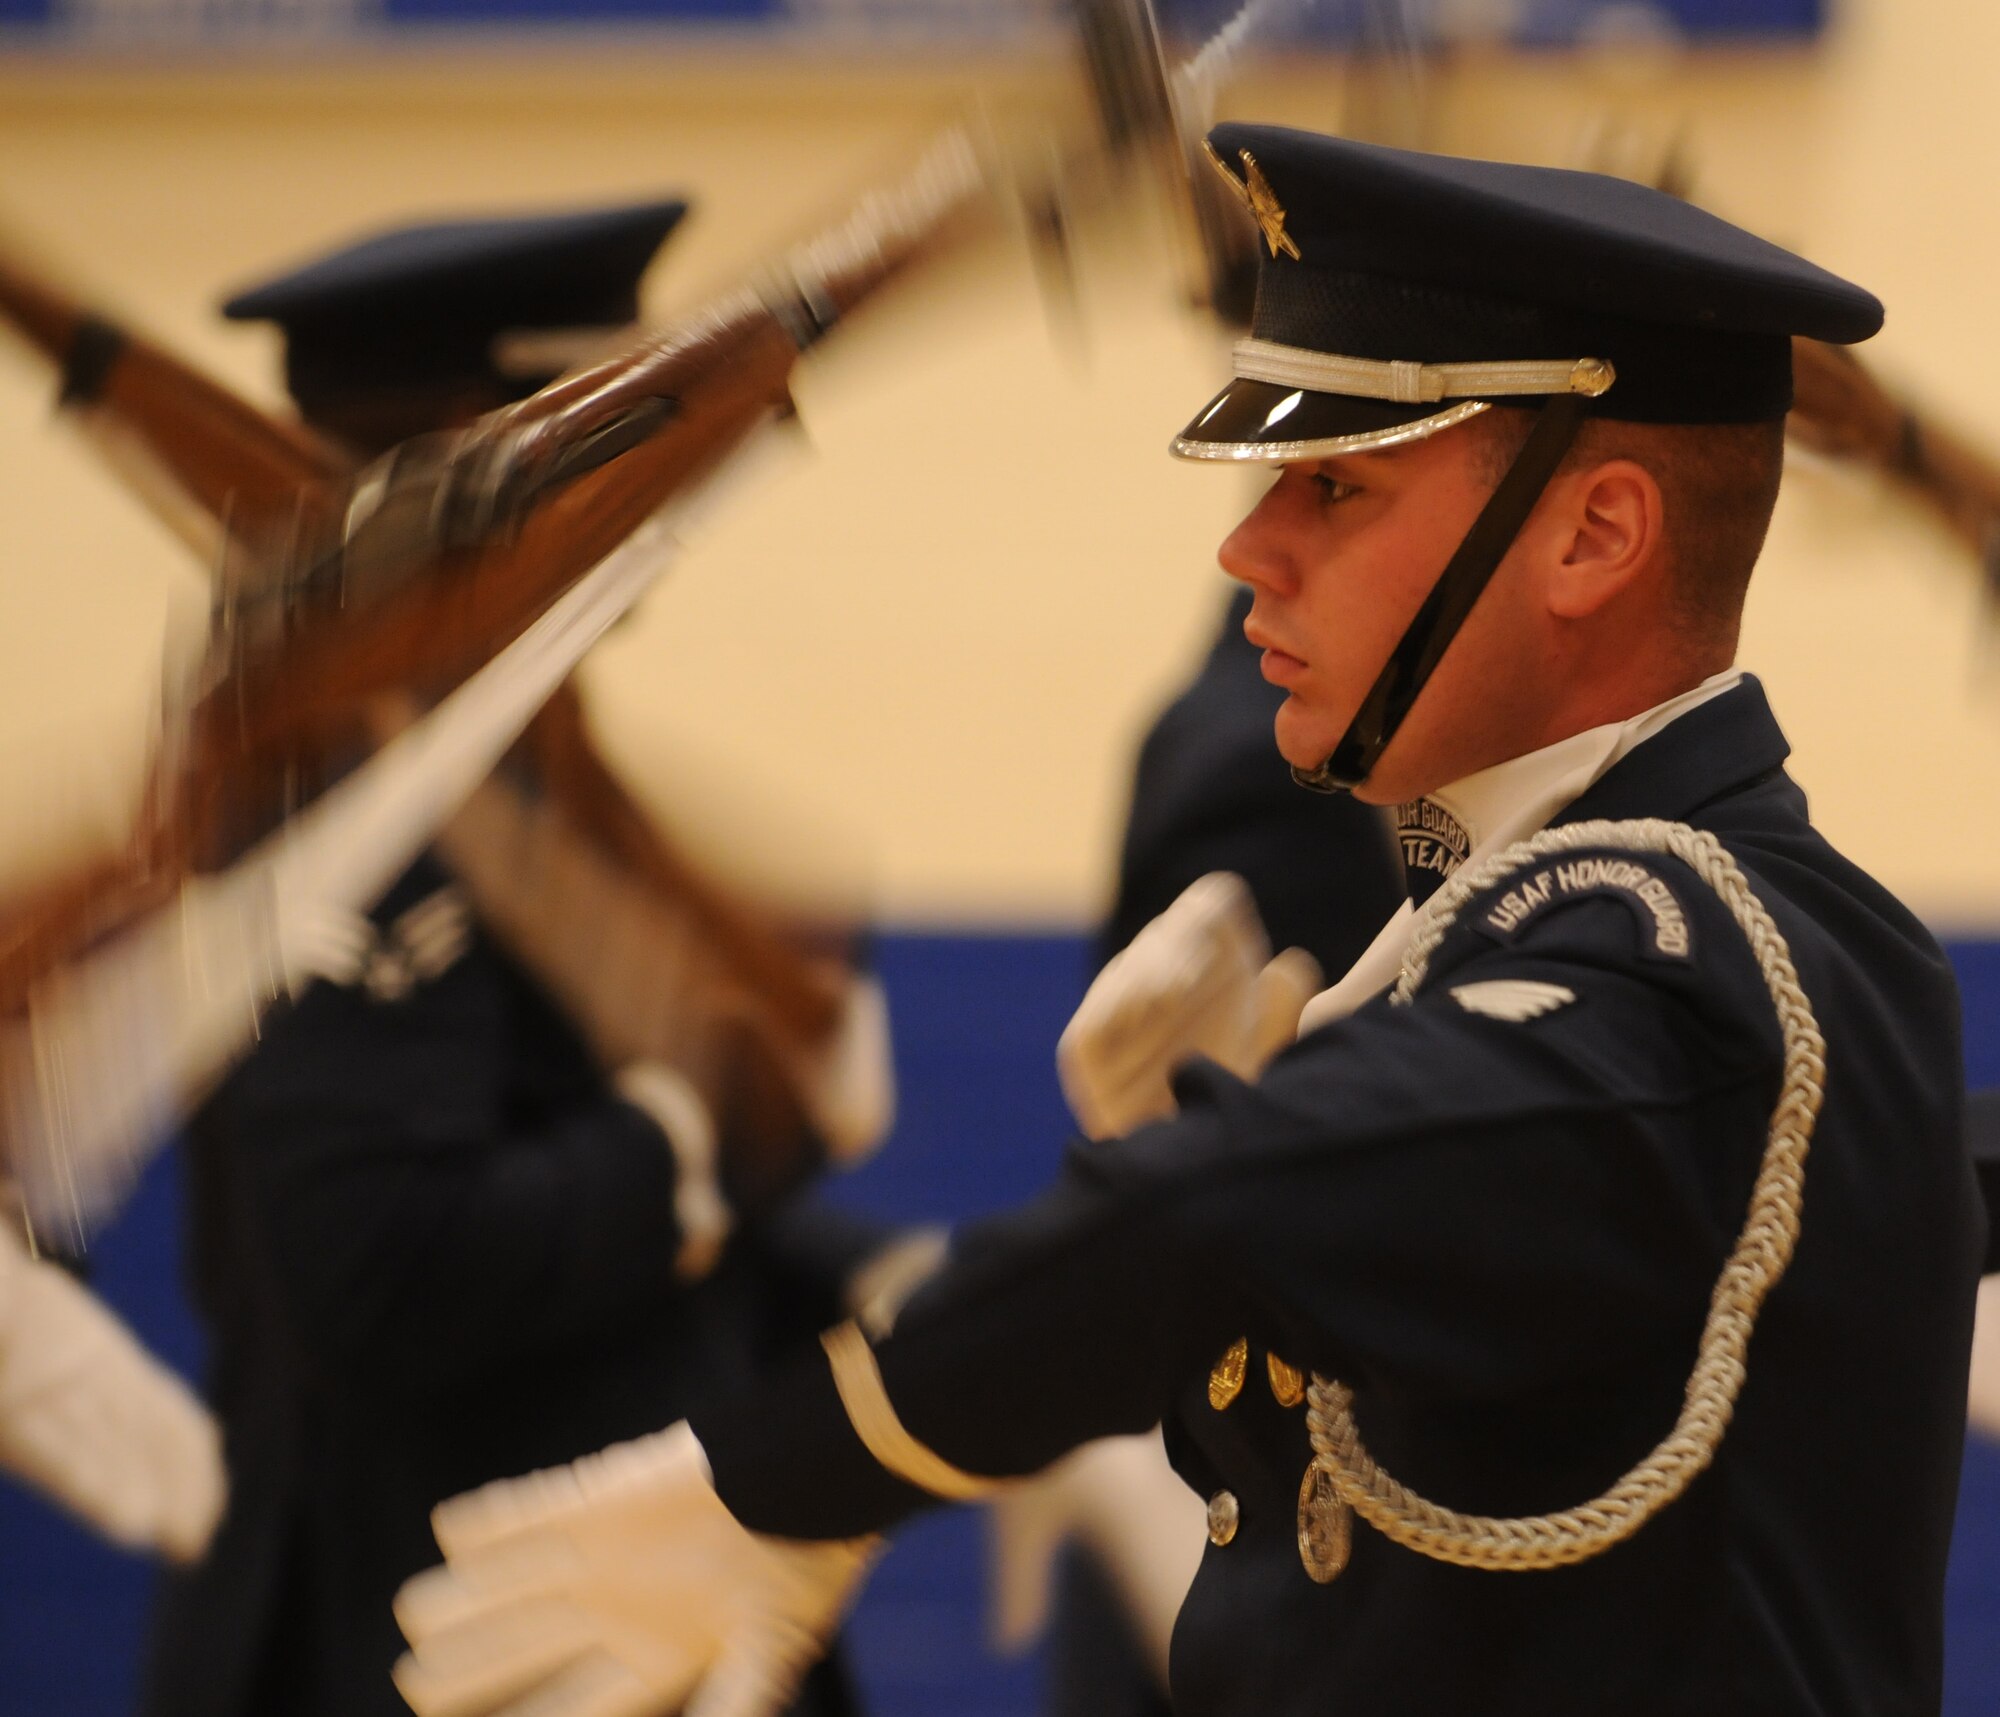 Staff Sgt. Timothy Plakas of the United States Air Force Honor Guard Drill Team performs for students at Randolph Air Force Base, Texas on Nov. 2.  The Drill Team tours worldwide representing all Airmen while showcasing Air Force precision and professionalism and personifying the integrity, discipline, and teamwork of every Airman and every Air Force mission. During the Air Force Honor Guard's 60-year history, their traveling component, the Drill Team, has performed in every state of the union and many countries abroad. (U.S. Air Force photo by Senior Airman Sean Adams)
